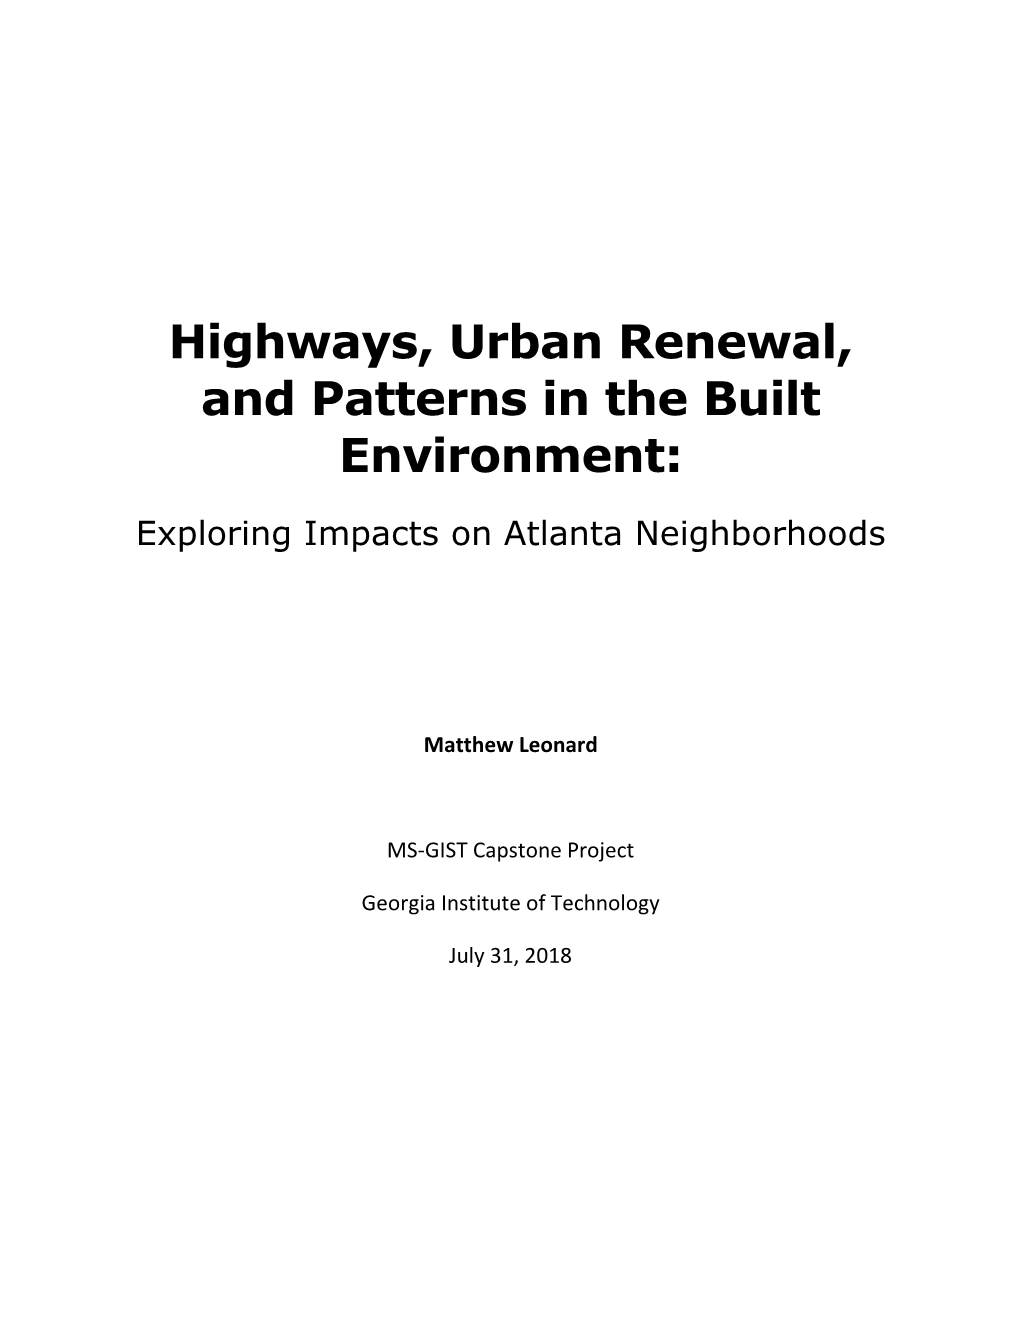 Highways, Urban Renewal, and Patterns in the Built Environment